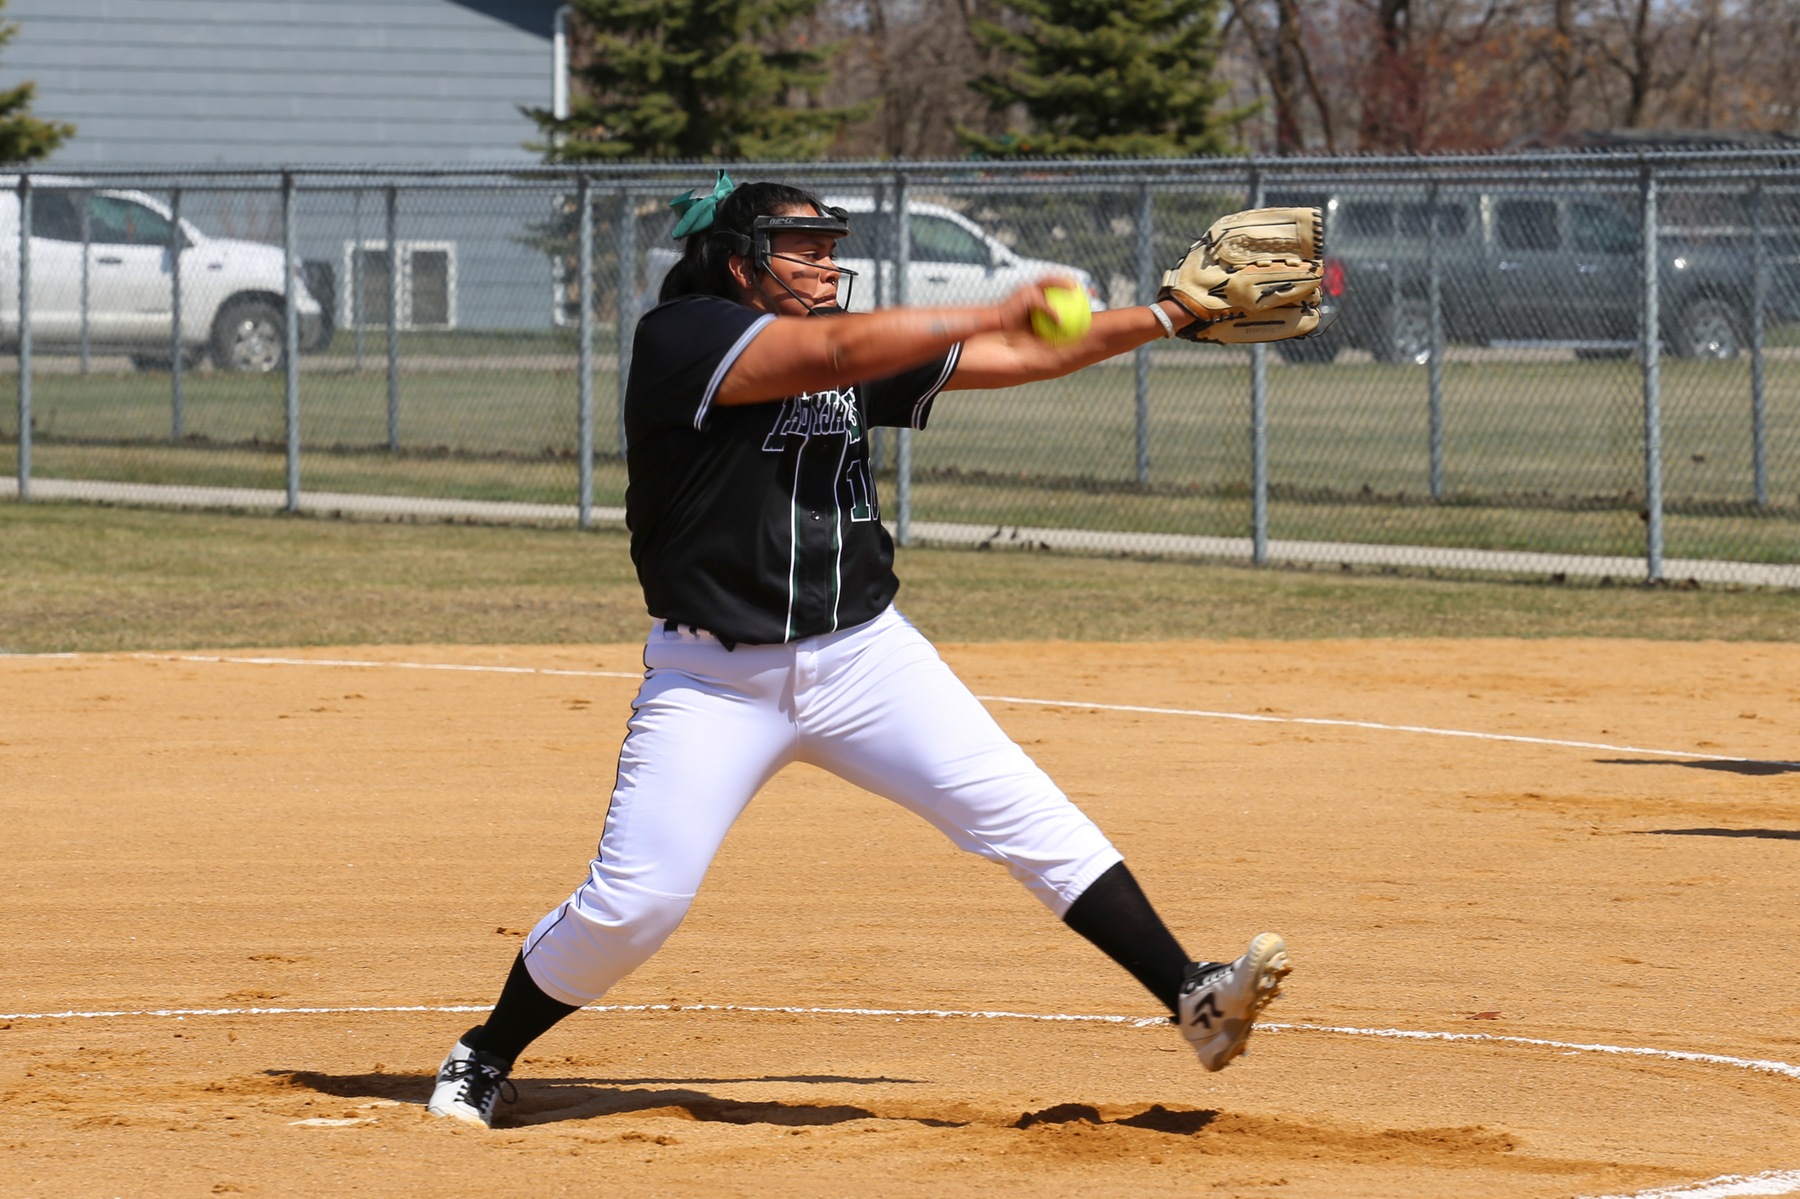 Redshirt freshman Randee Charlo has been named the MonDak Player of the Week and the NJCAA Pitcher of the Week for her 29 strikeouts in 14 innings pitched last weekend.